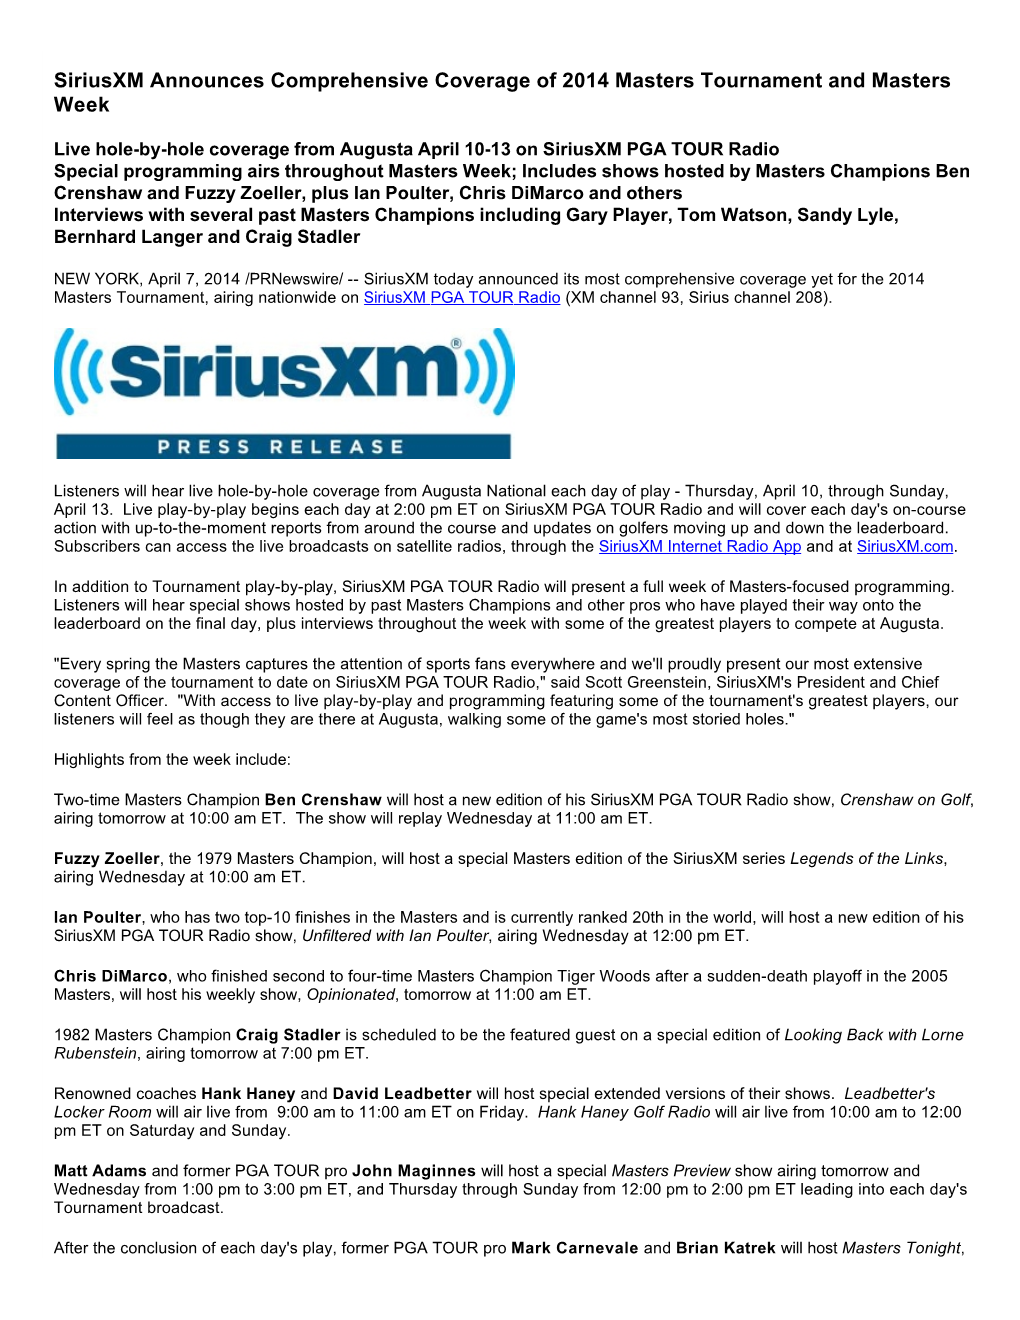 Siriusxm Announces Comprehensive Coverage of 2014 Masters Tournament and Masters Week